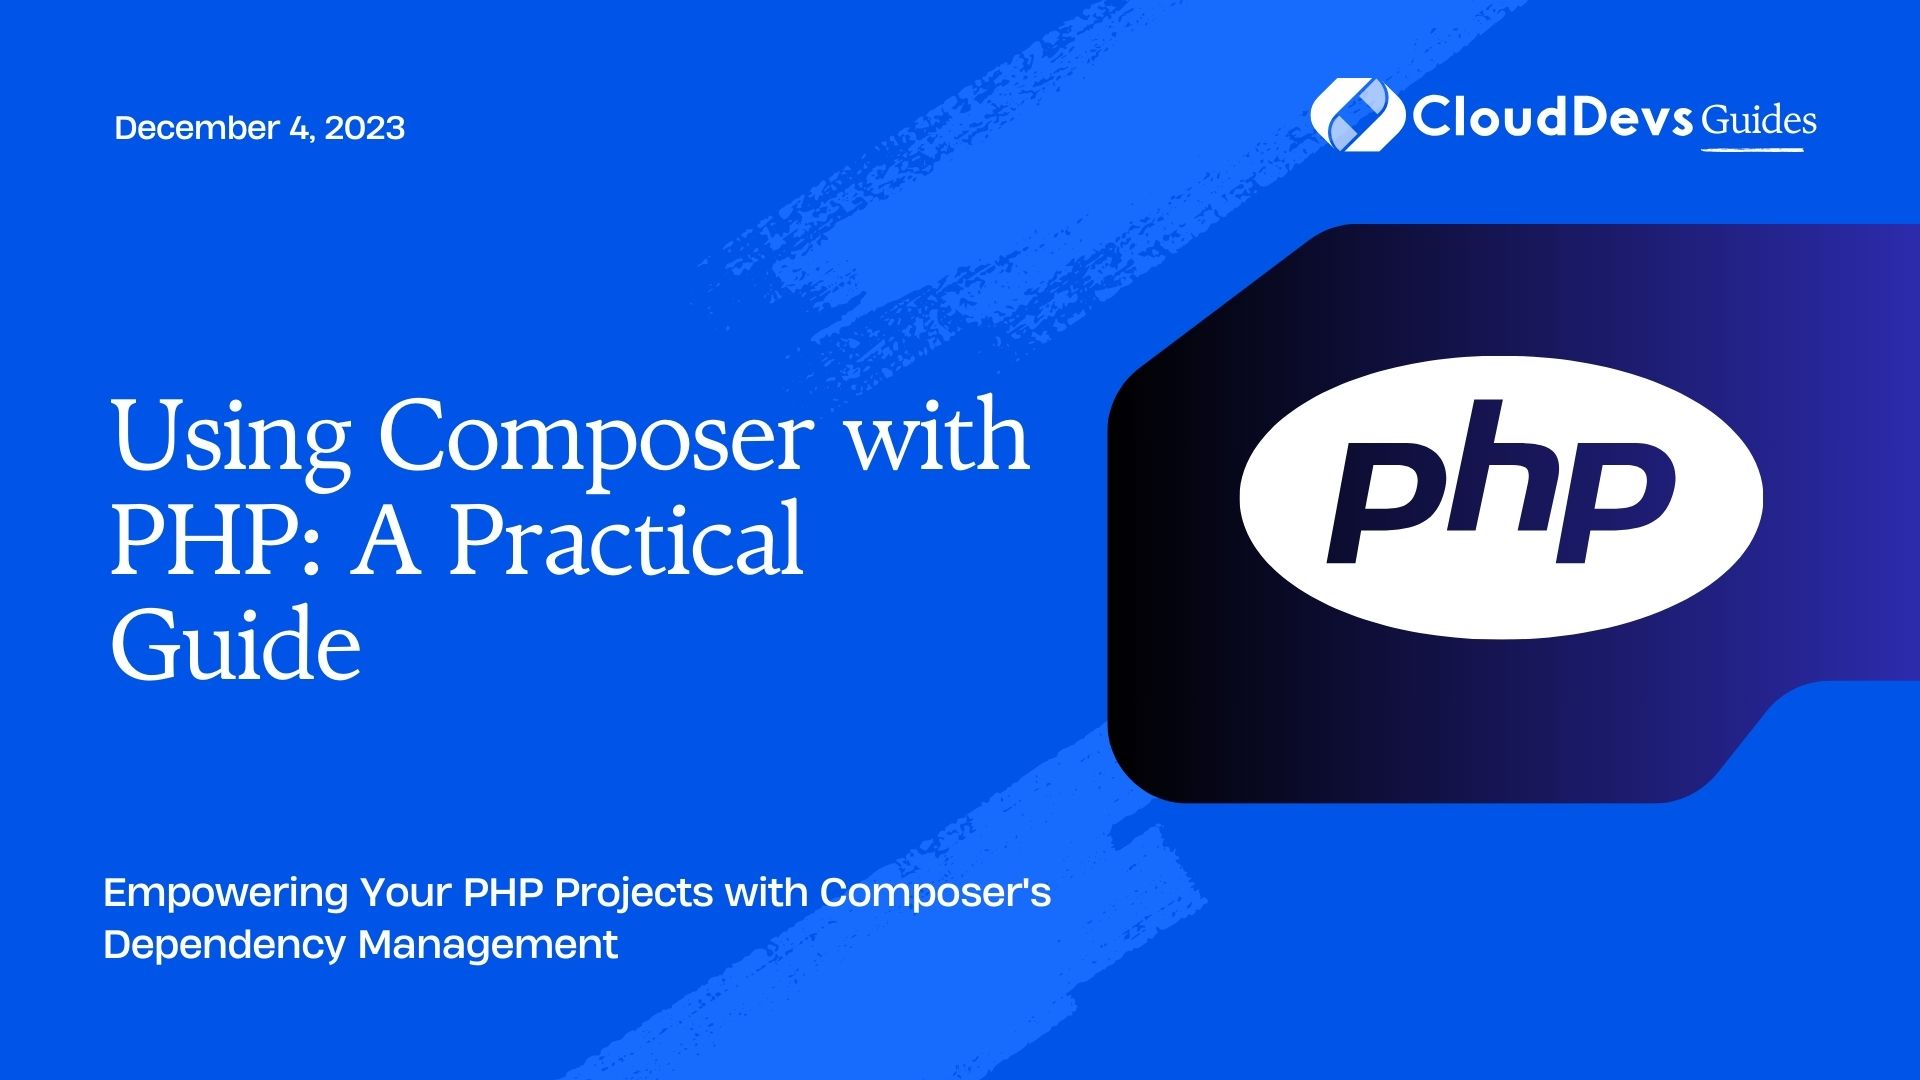 Using Composer with PHP: A Practical Guide